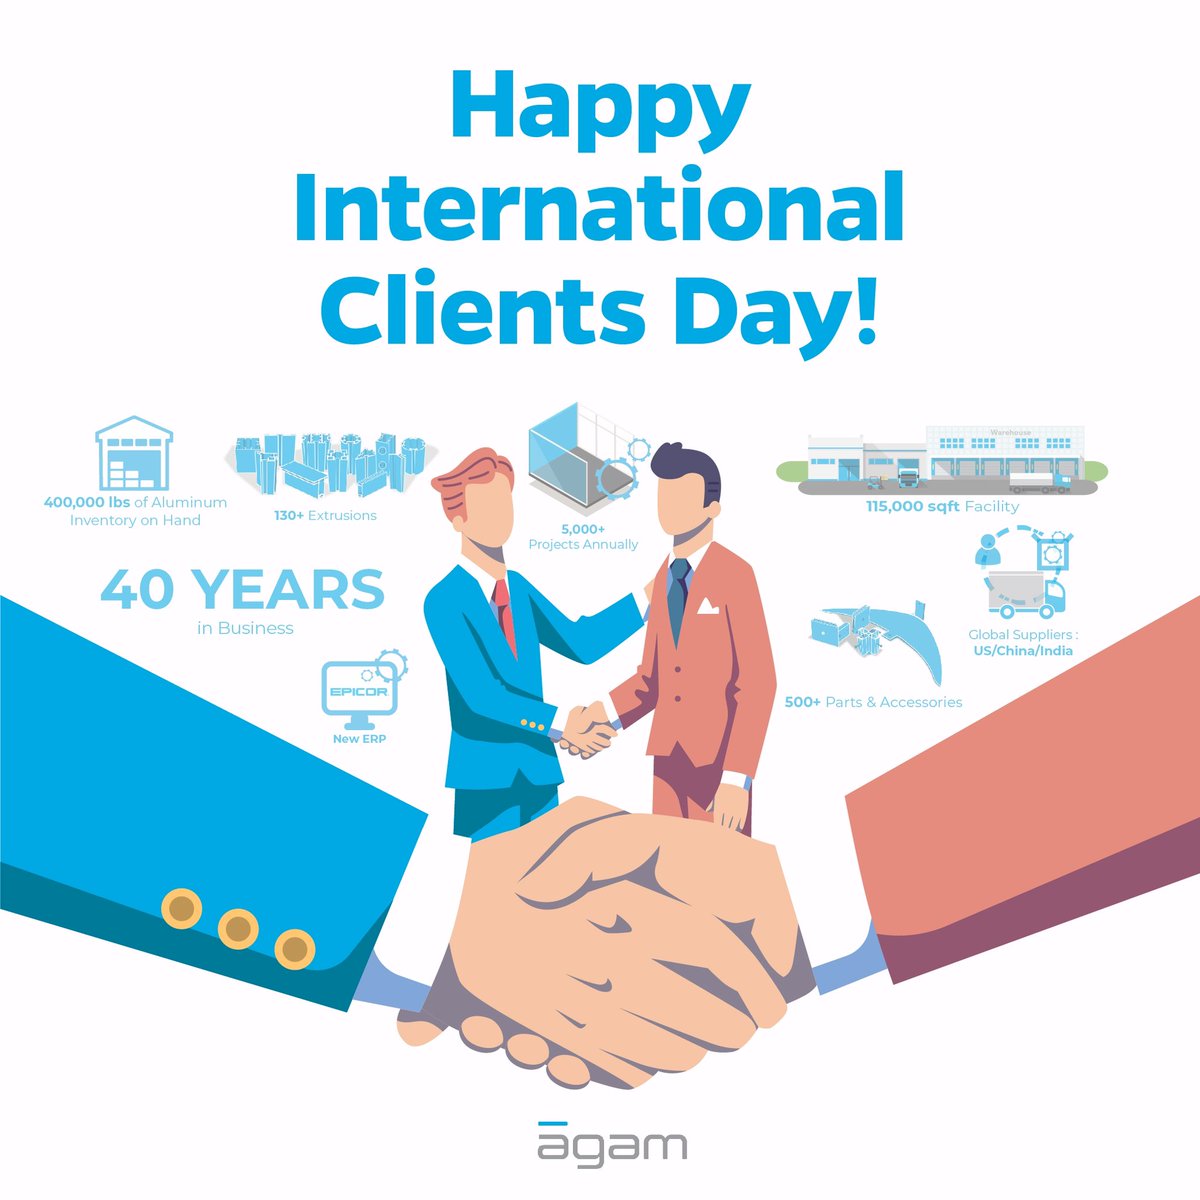 Yesterday was international clients day! Cheers to our amazing clients who make every project a success! Thank you for making our job so fulfilling. 🫶🏽 #InternationalClientsDay #Grateful #ClientLove